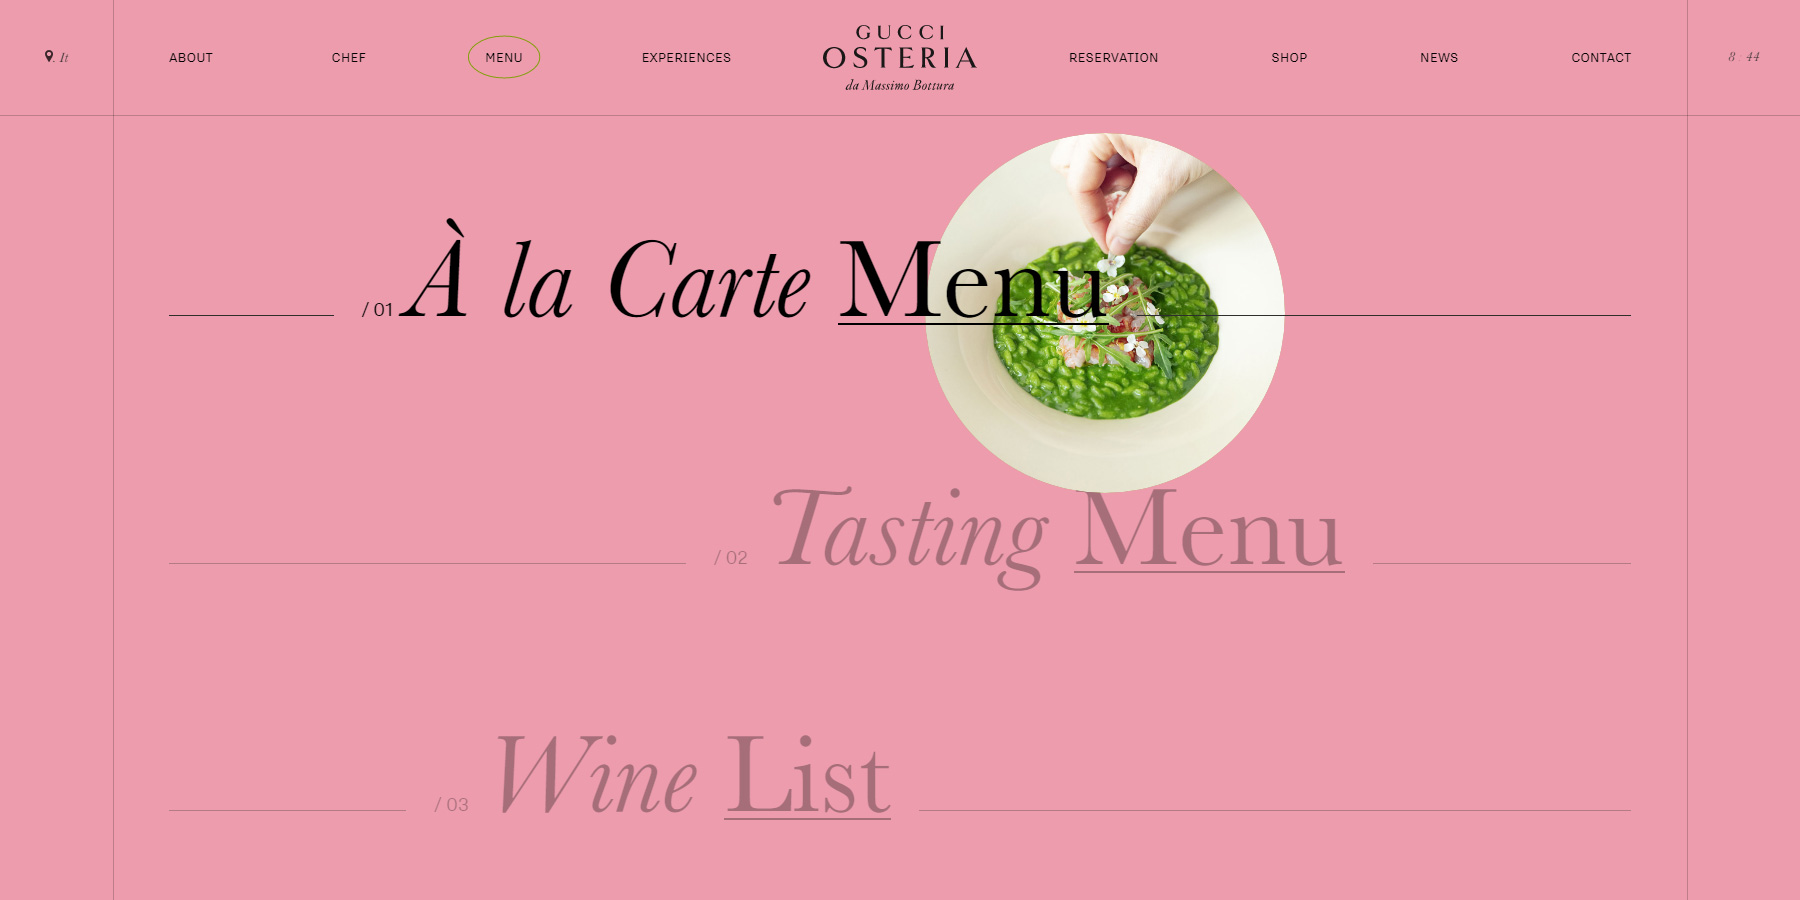 Gucci Osteria - Website of the Day